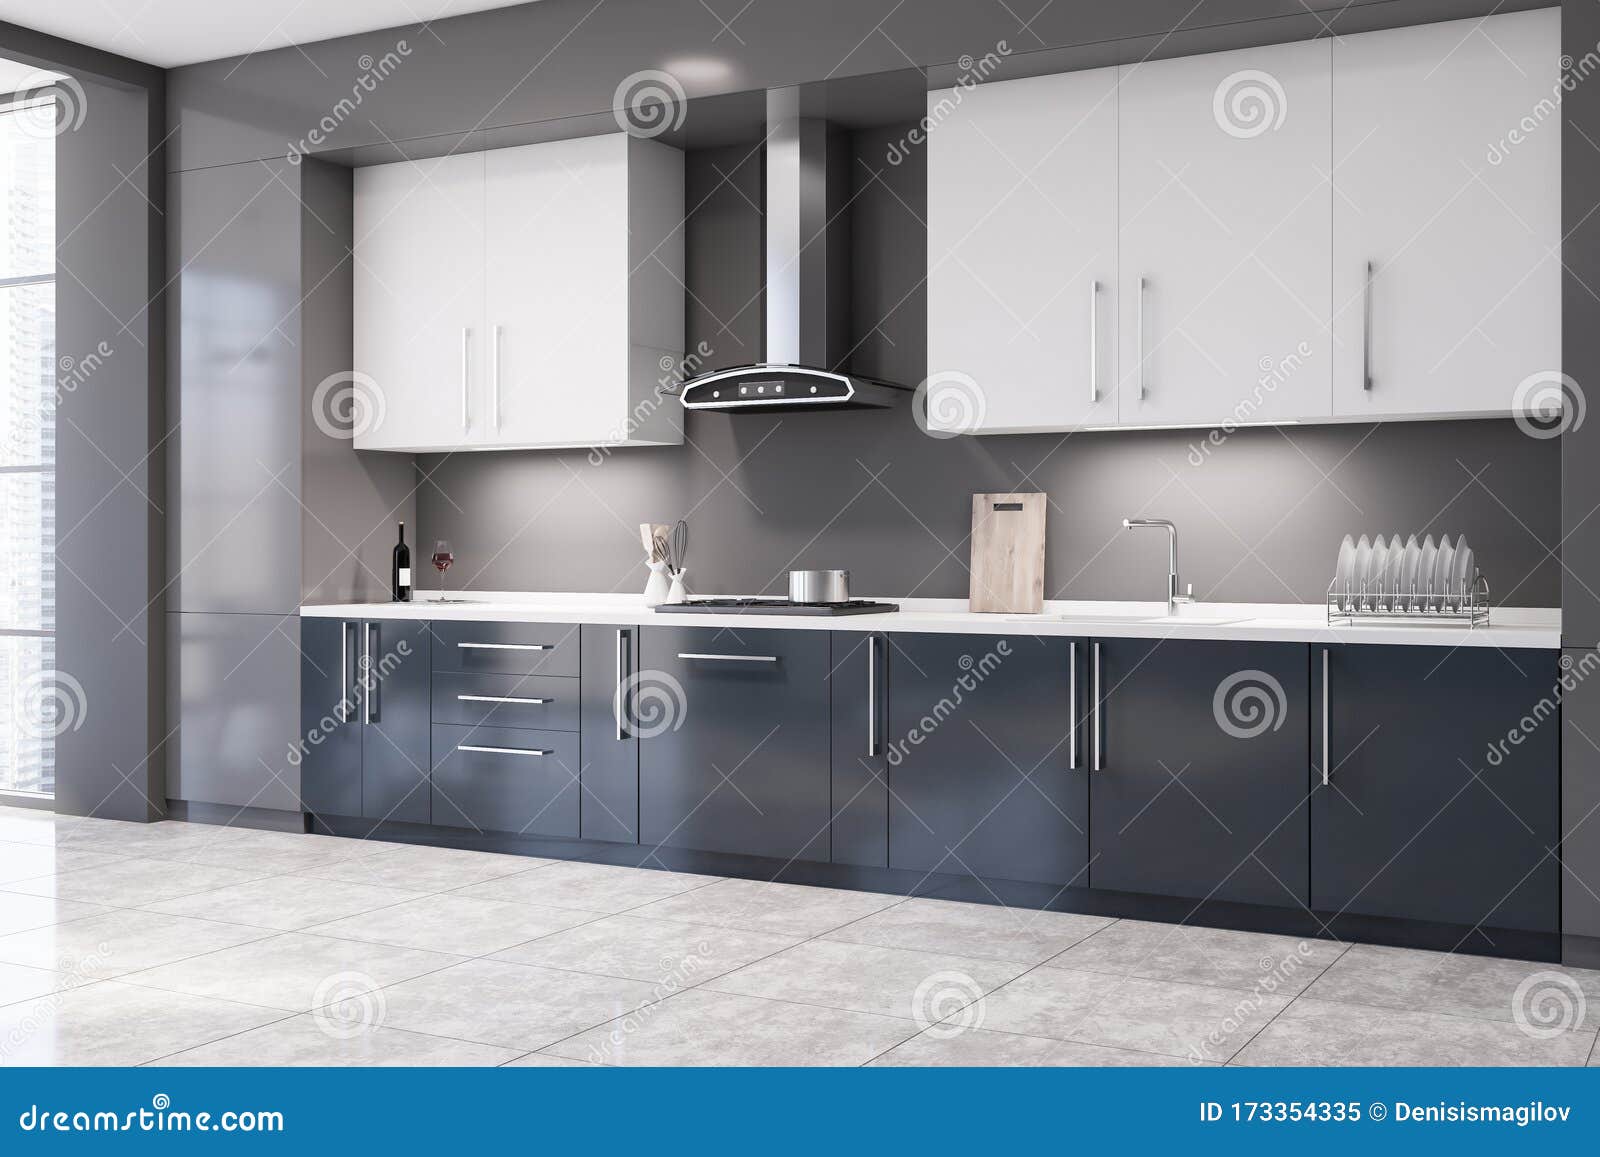 Gray And Blue Kitchen Corner With Countertops Stock Illustration